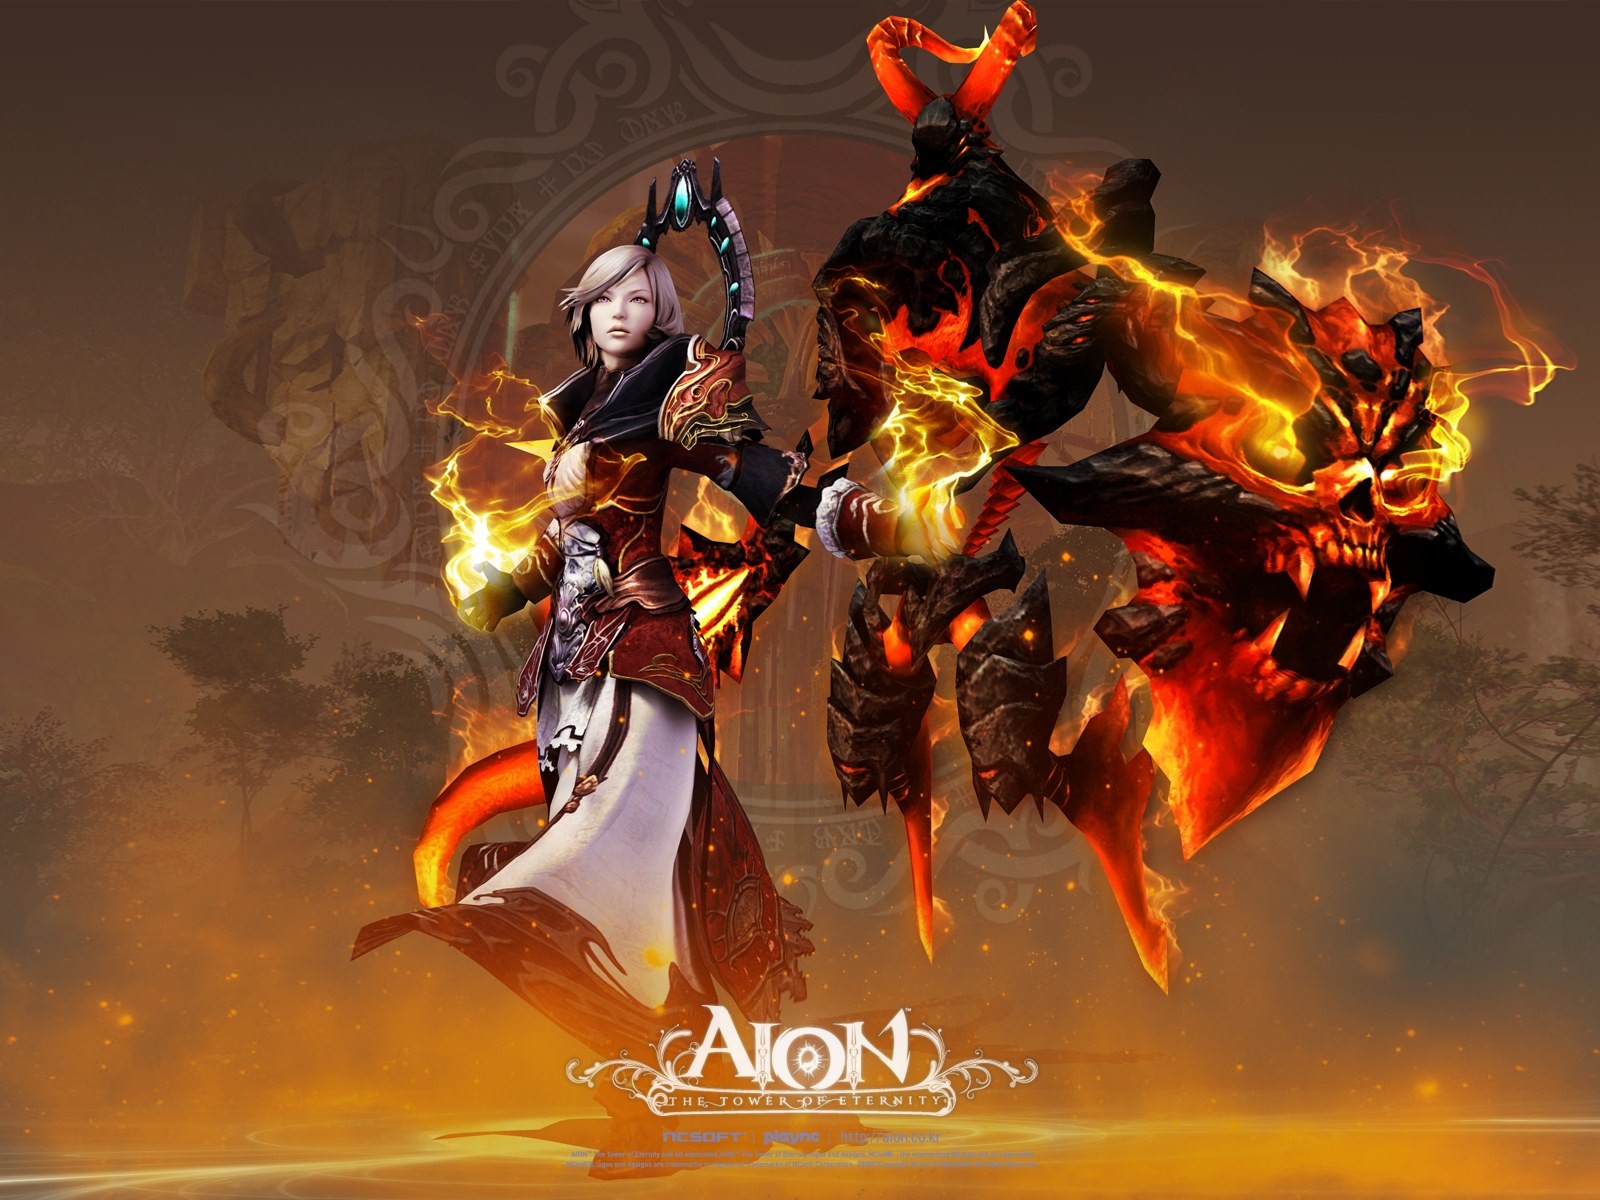 Aion modeling HD gaming wallpapers #11 - 1600x1200